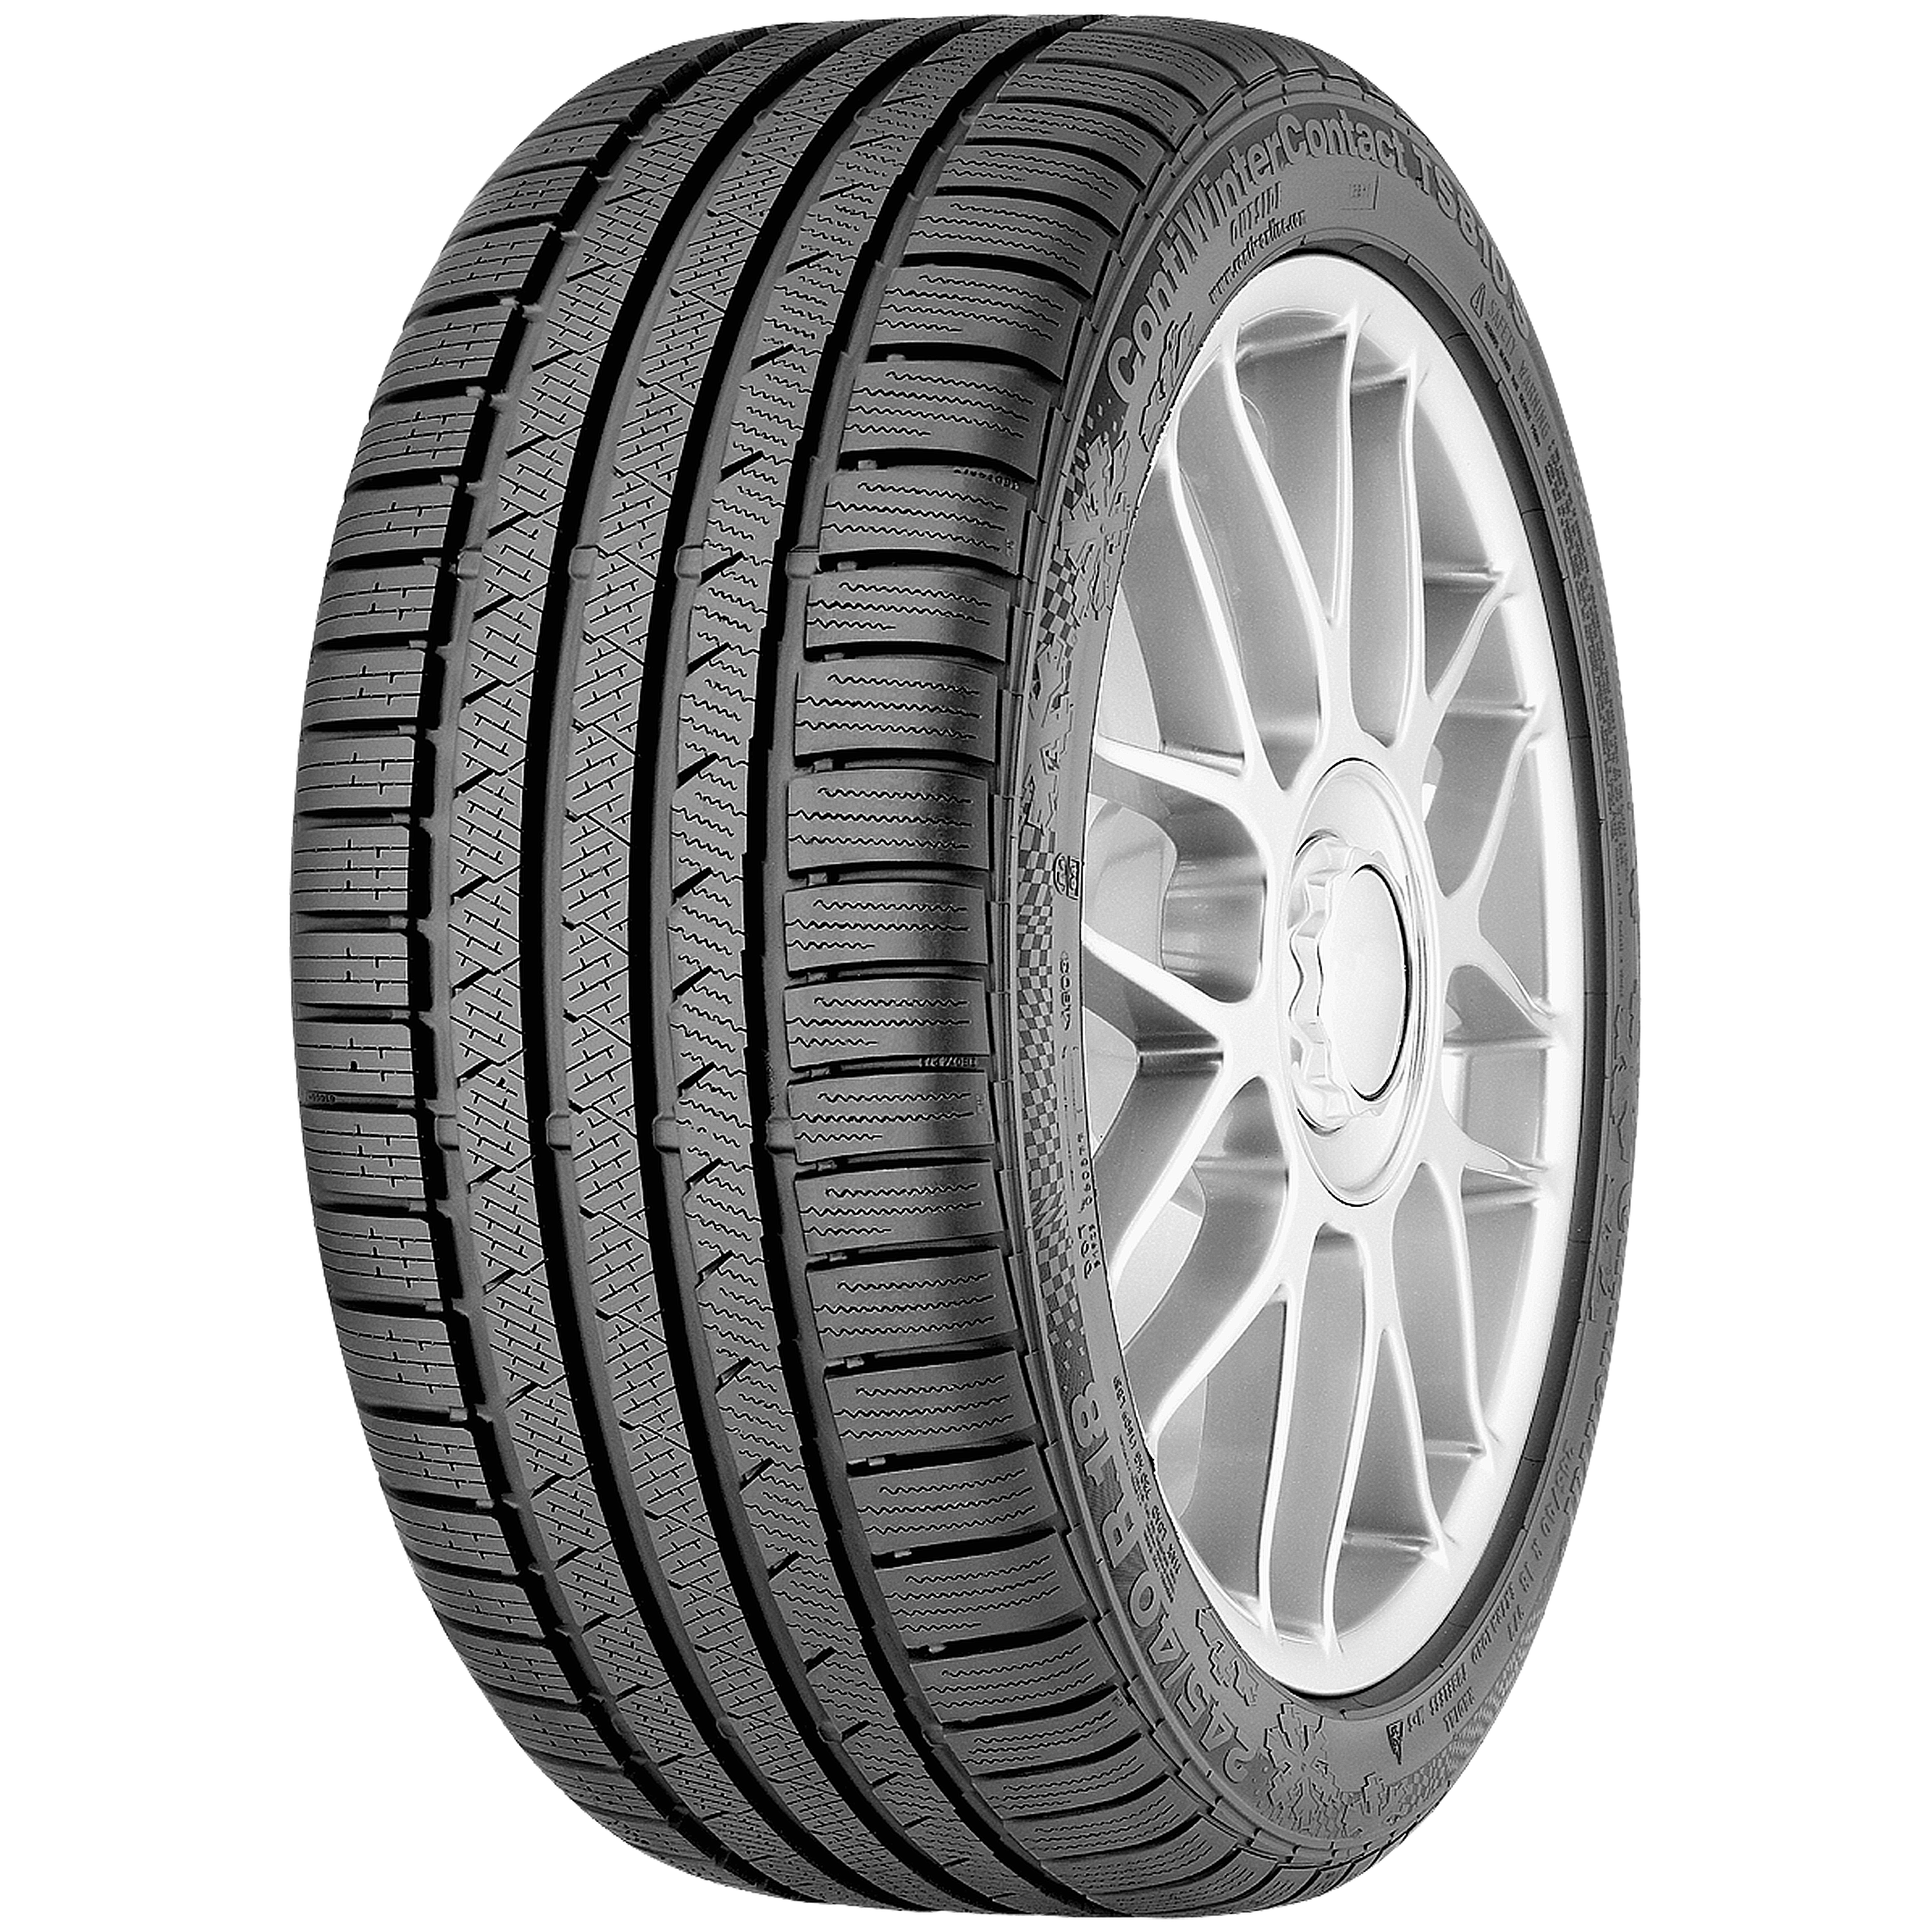 ContiWinterContact TS 810 tire luxury-class S: and The powerful cars sporty for winter medium